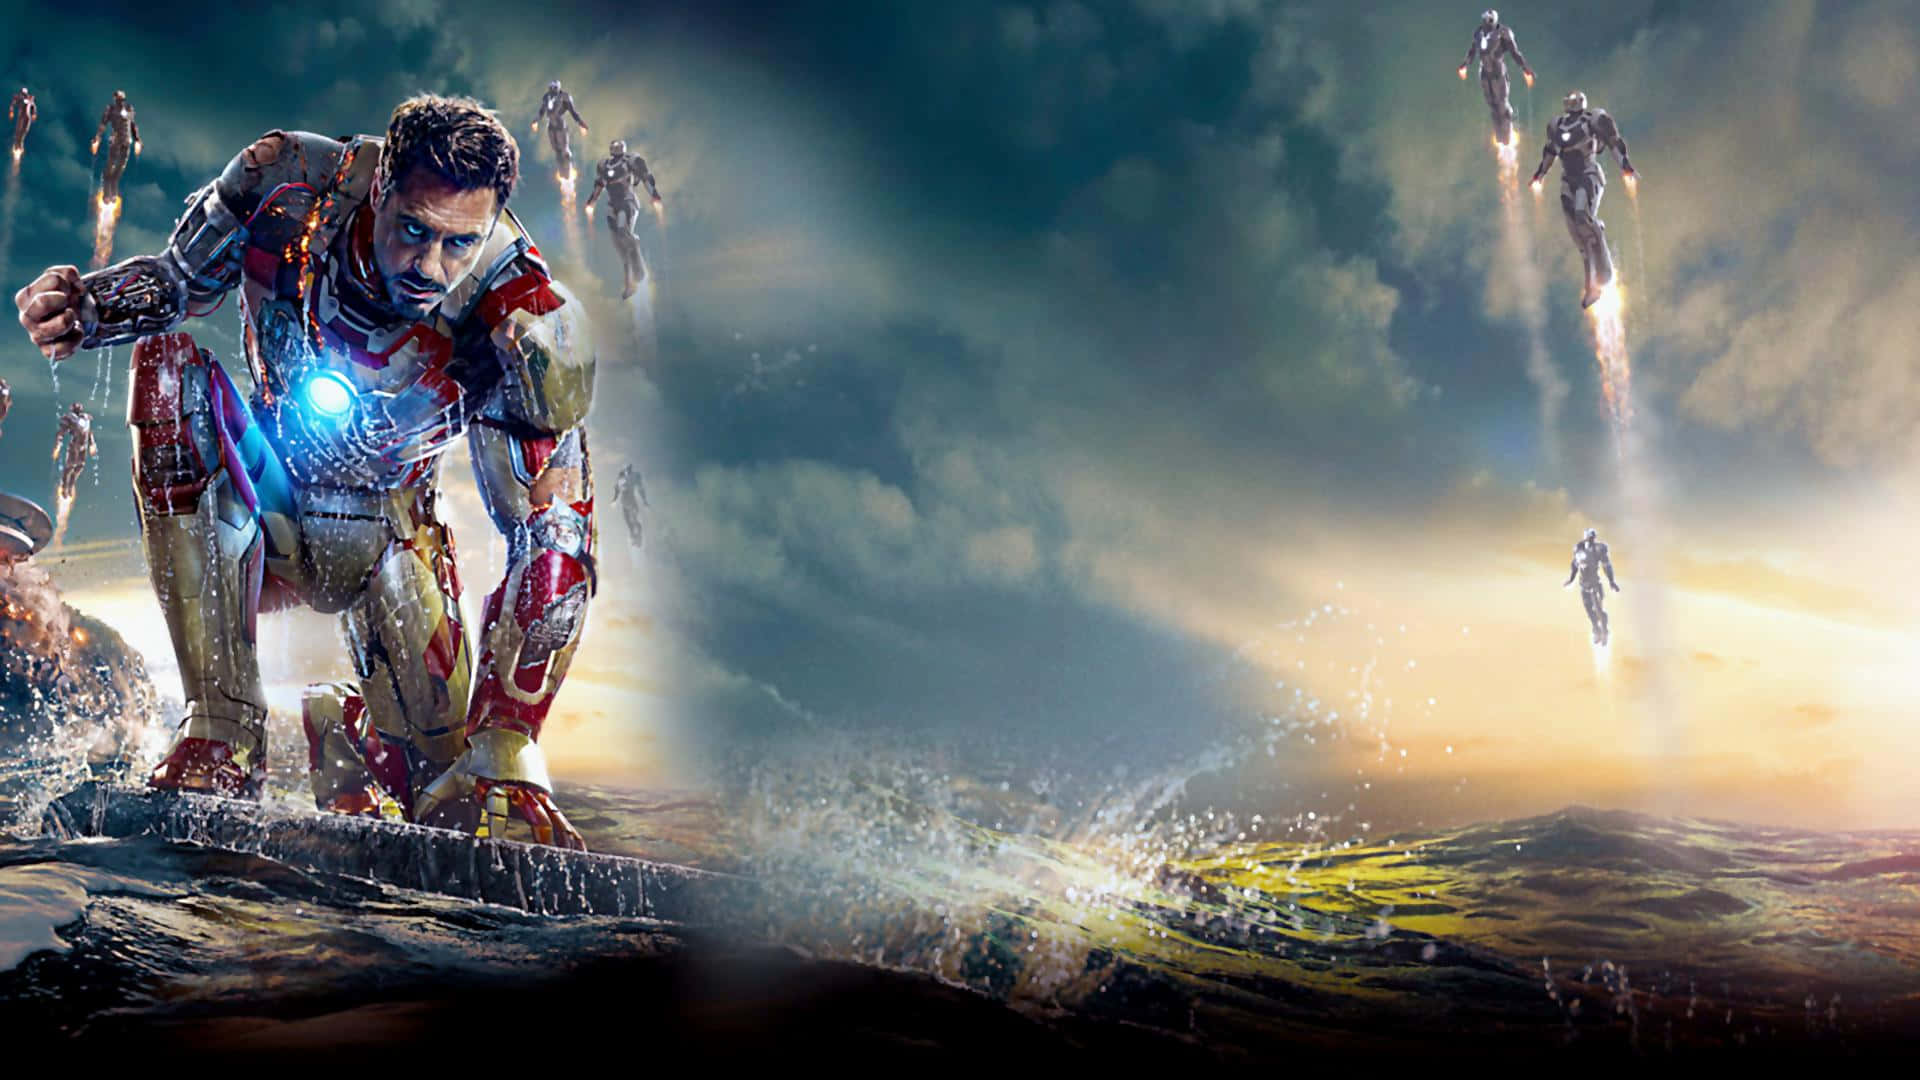 Iron Man 3 - Suit Up For A Wild Adventure